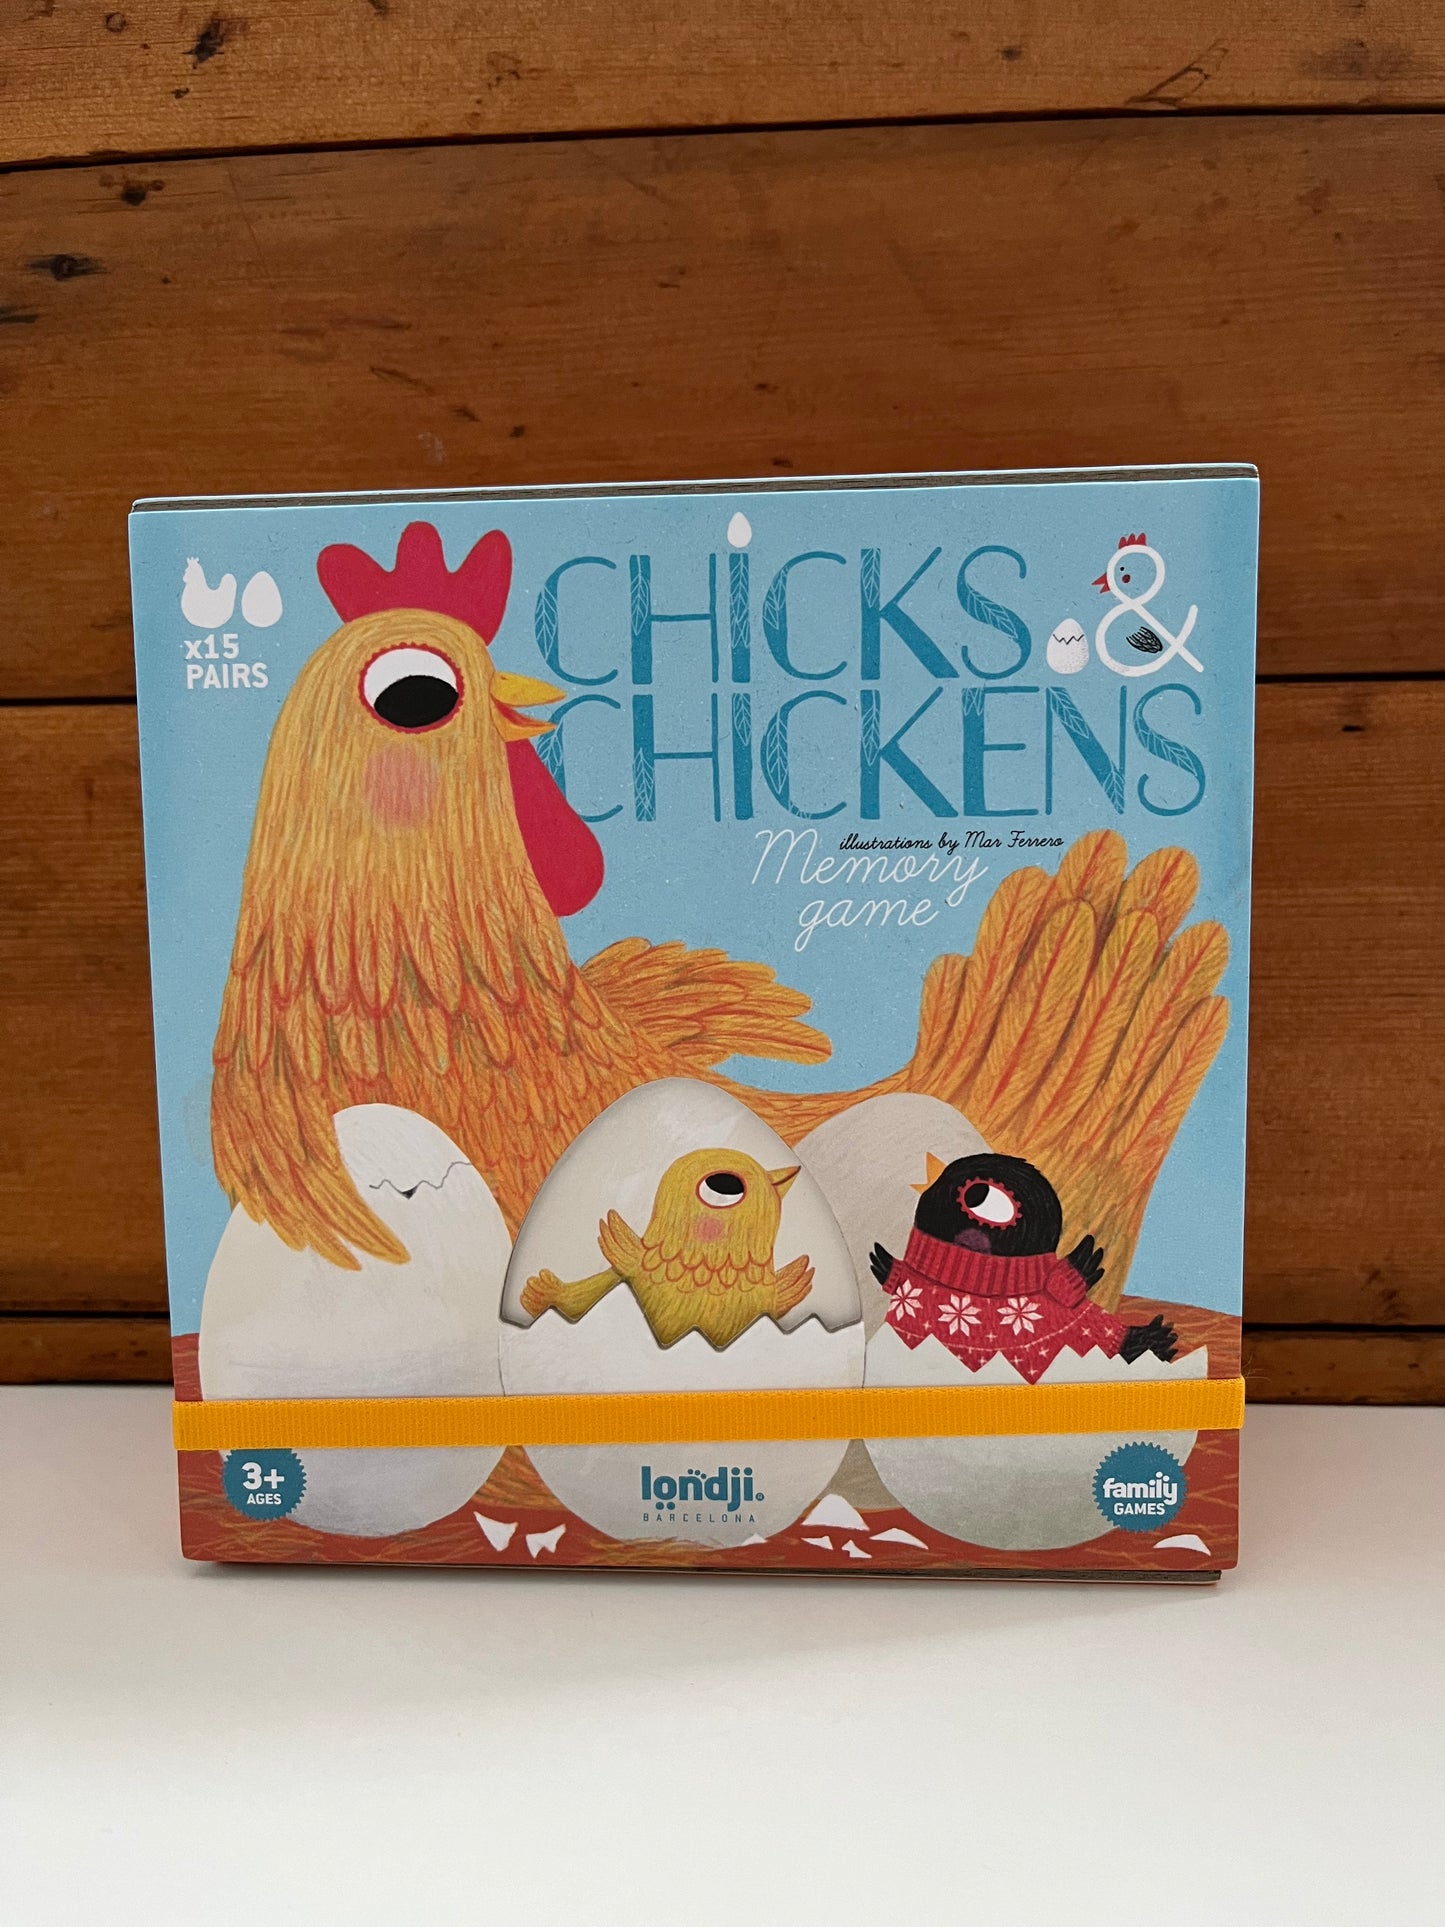 Family Memory Game - CHICKS & CHICKENS, age 3 years, 15 pairs!